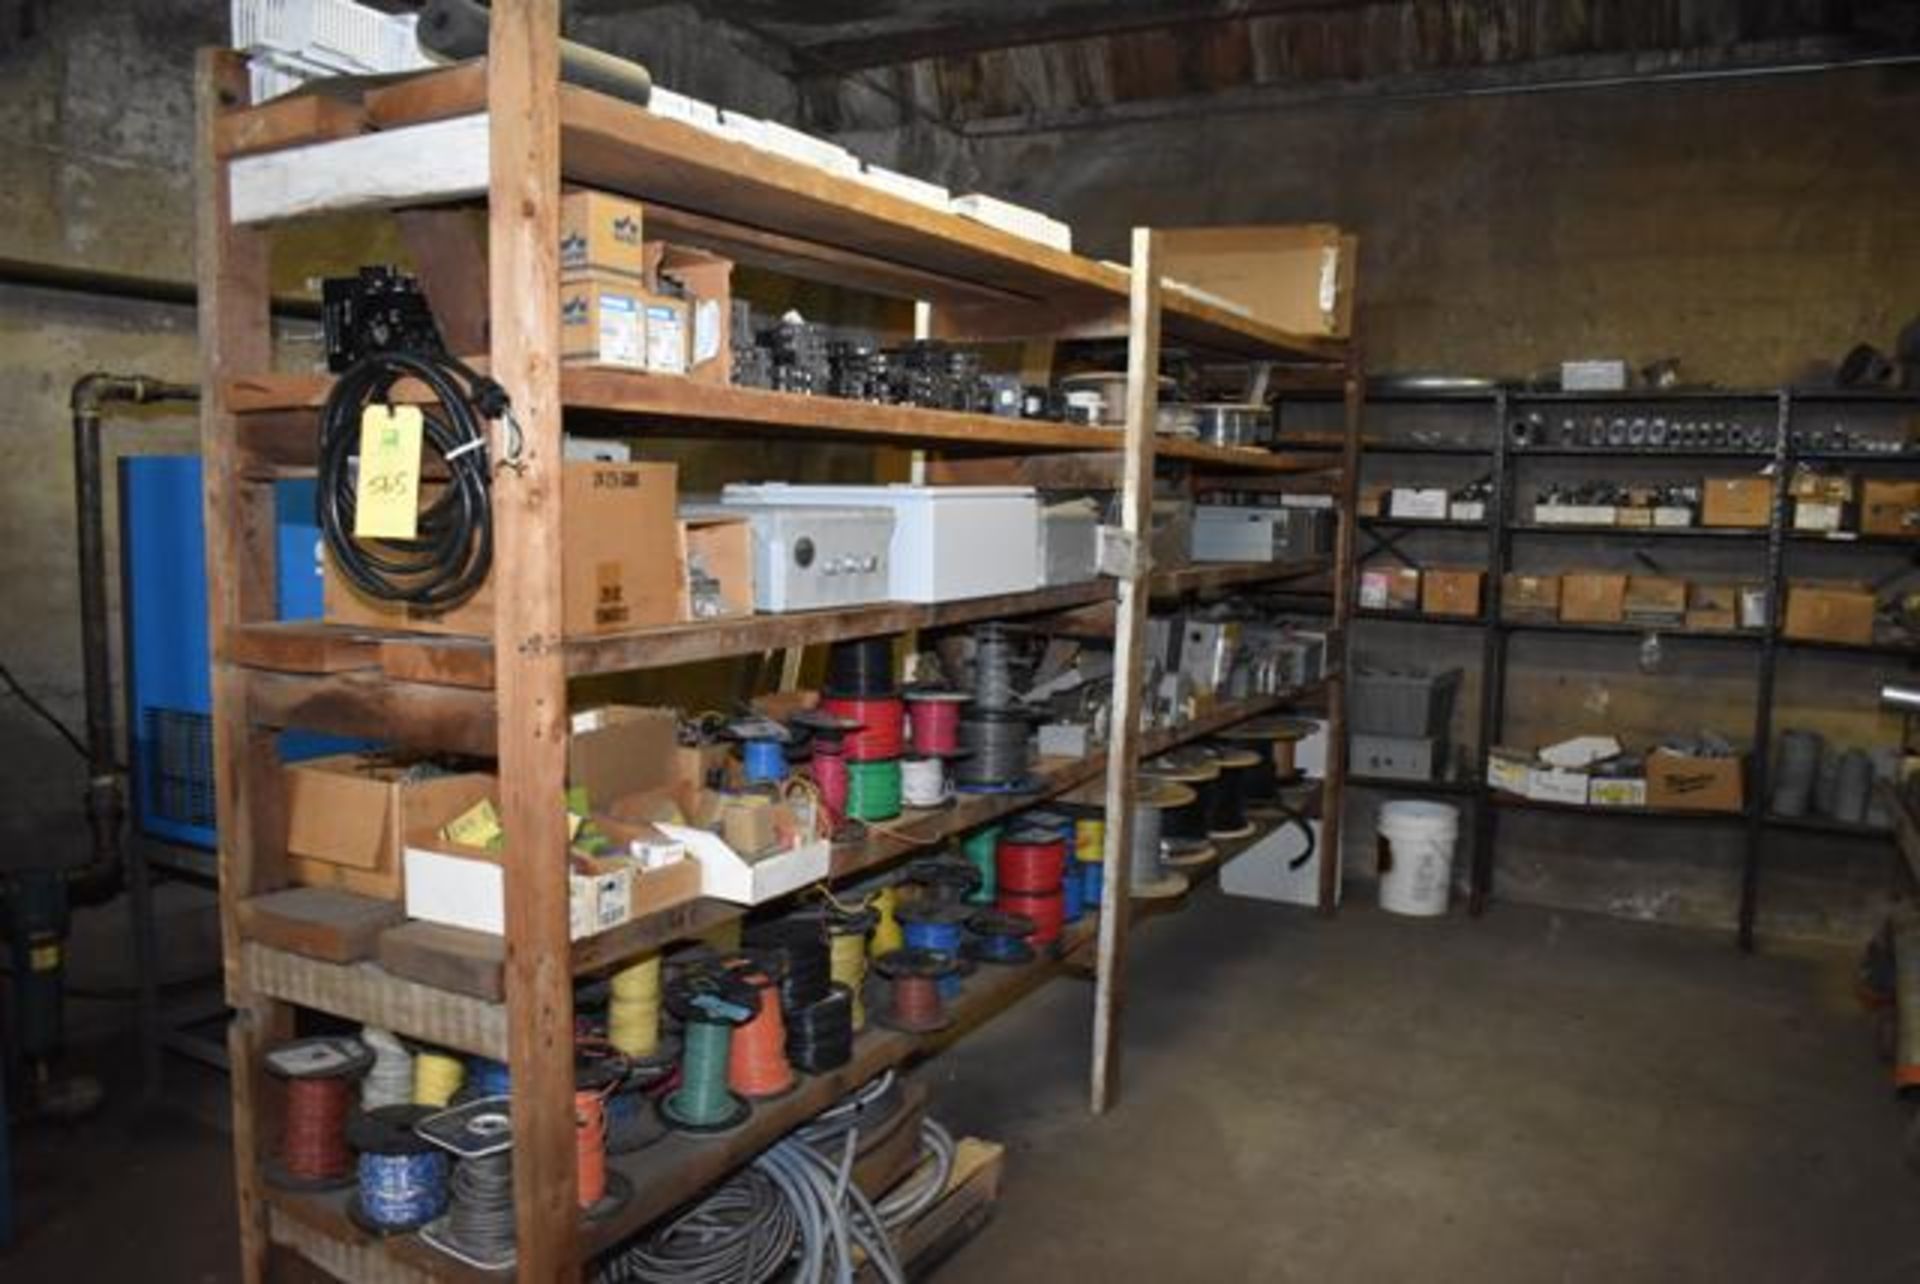 Qty. (6) Wood Shelf Contents - Plant Support, Partial Wire Spools, Clamps, Loading Fee: $500